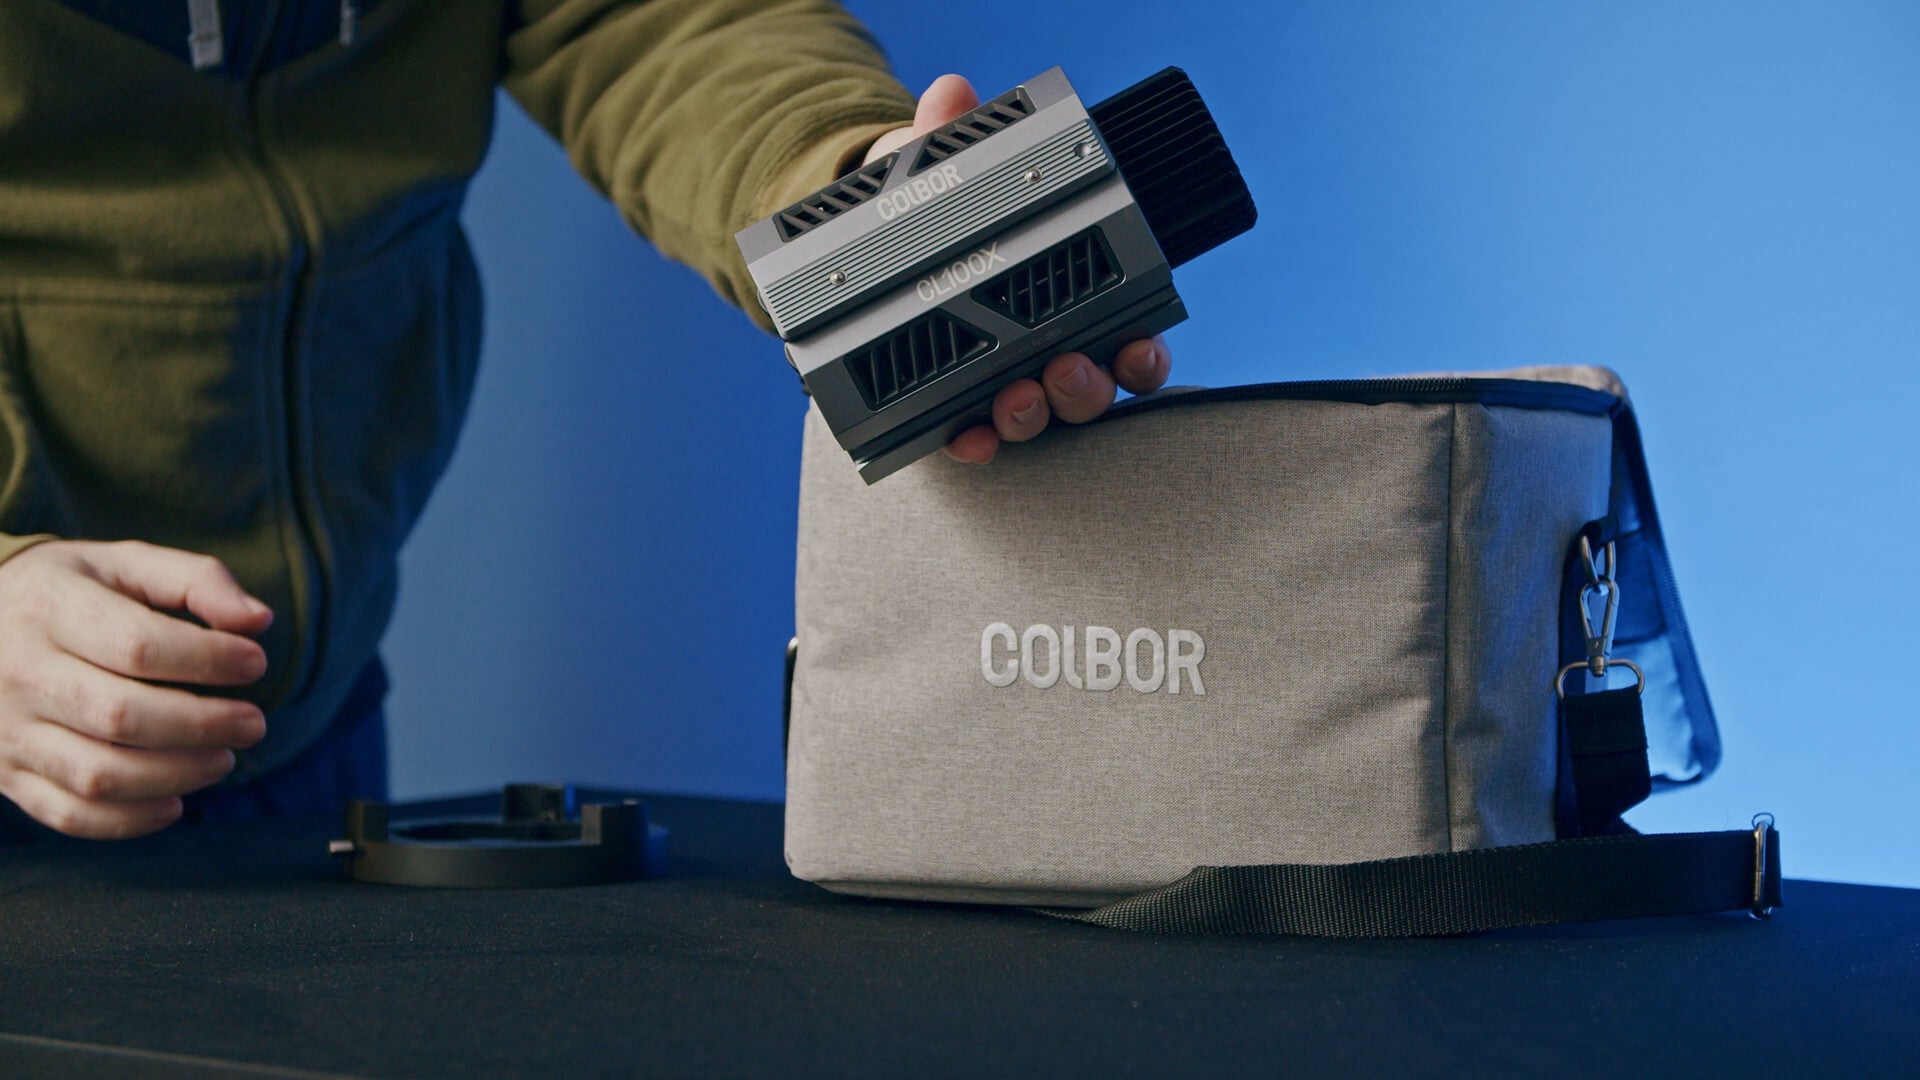 COLBOR CL100X review: What makes it ideal for lighting for live video?